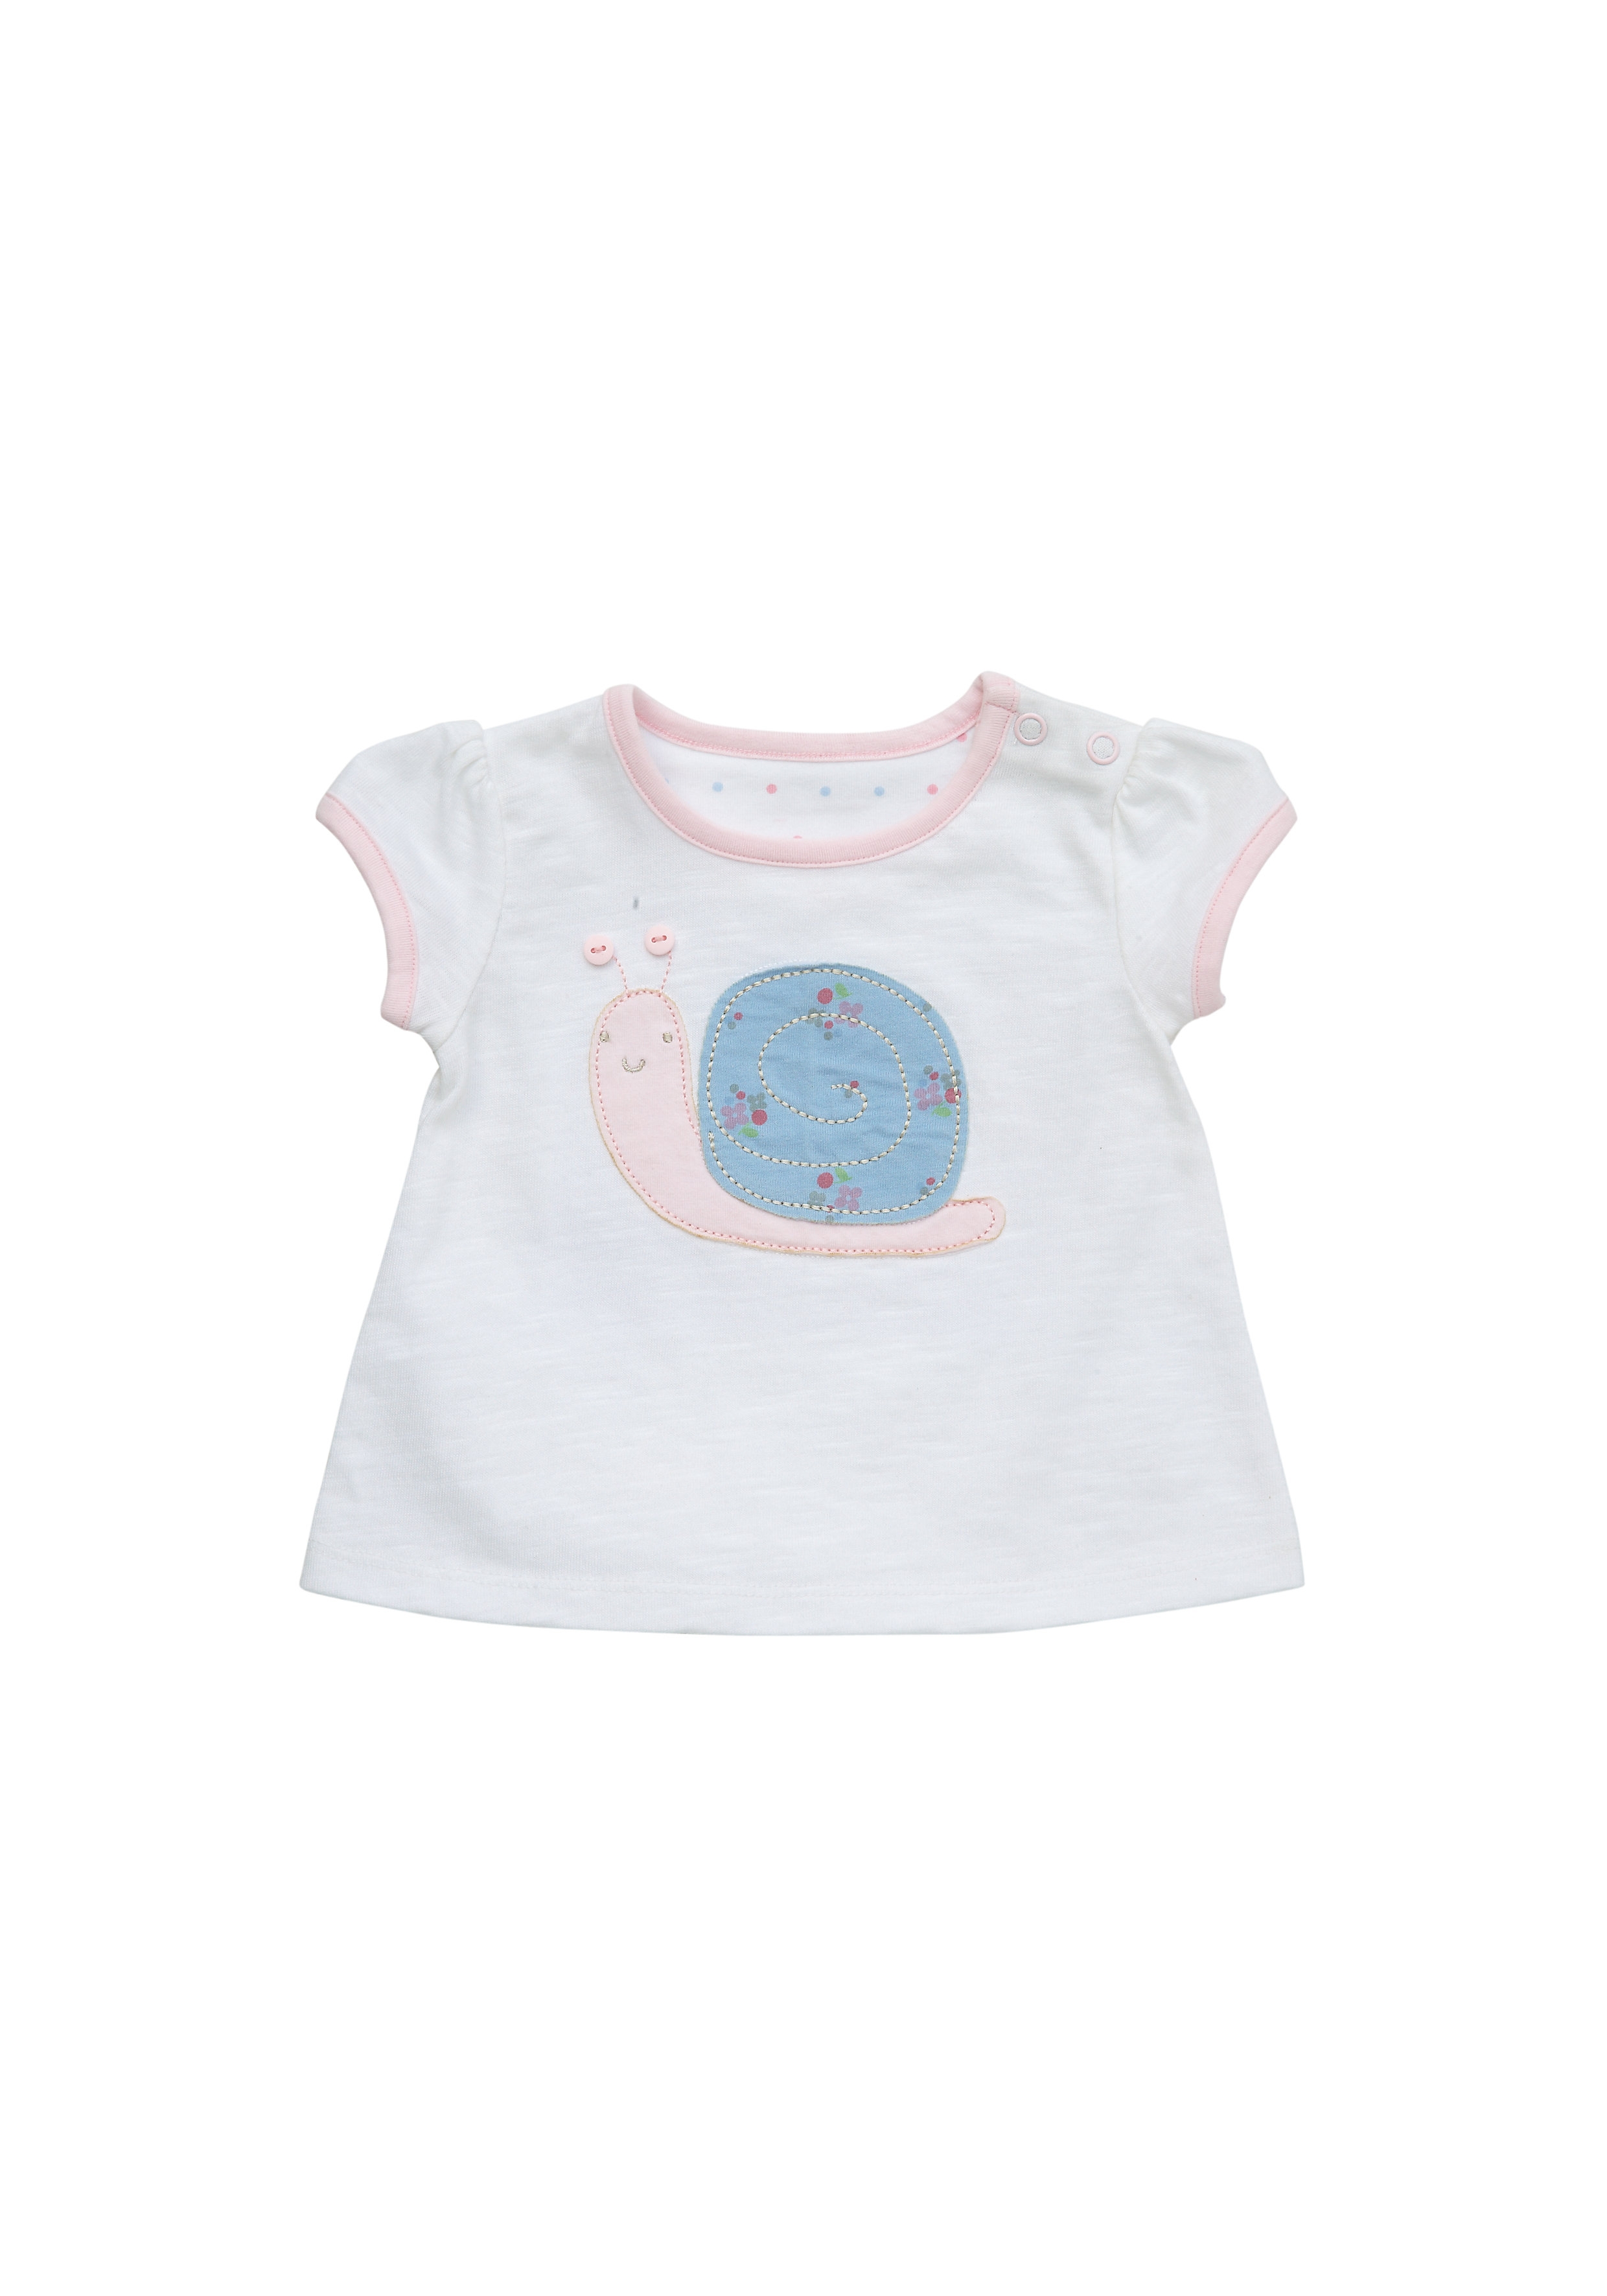 Mothercare | Girls Half Sleeves T-Shirt Snail Patchwork - White